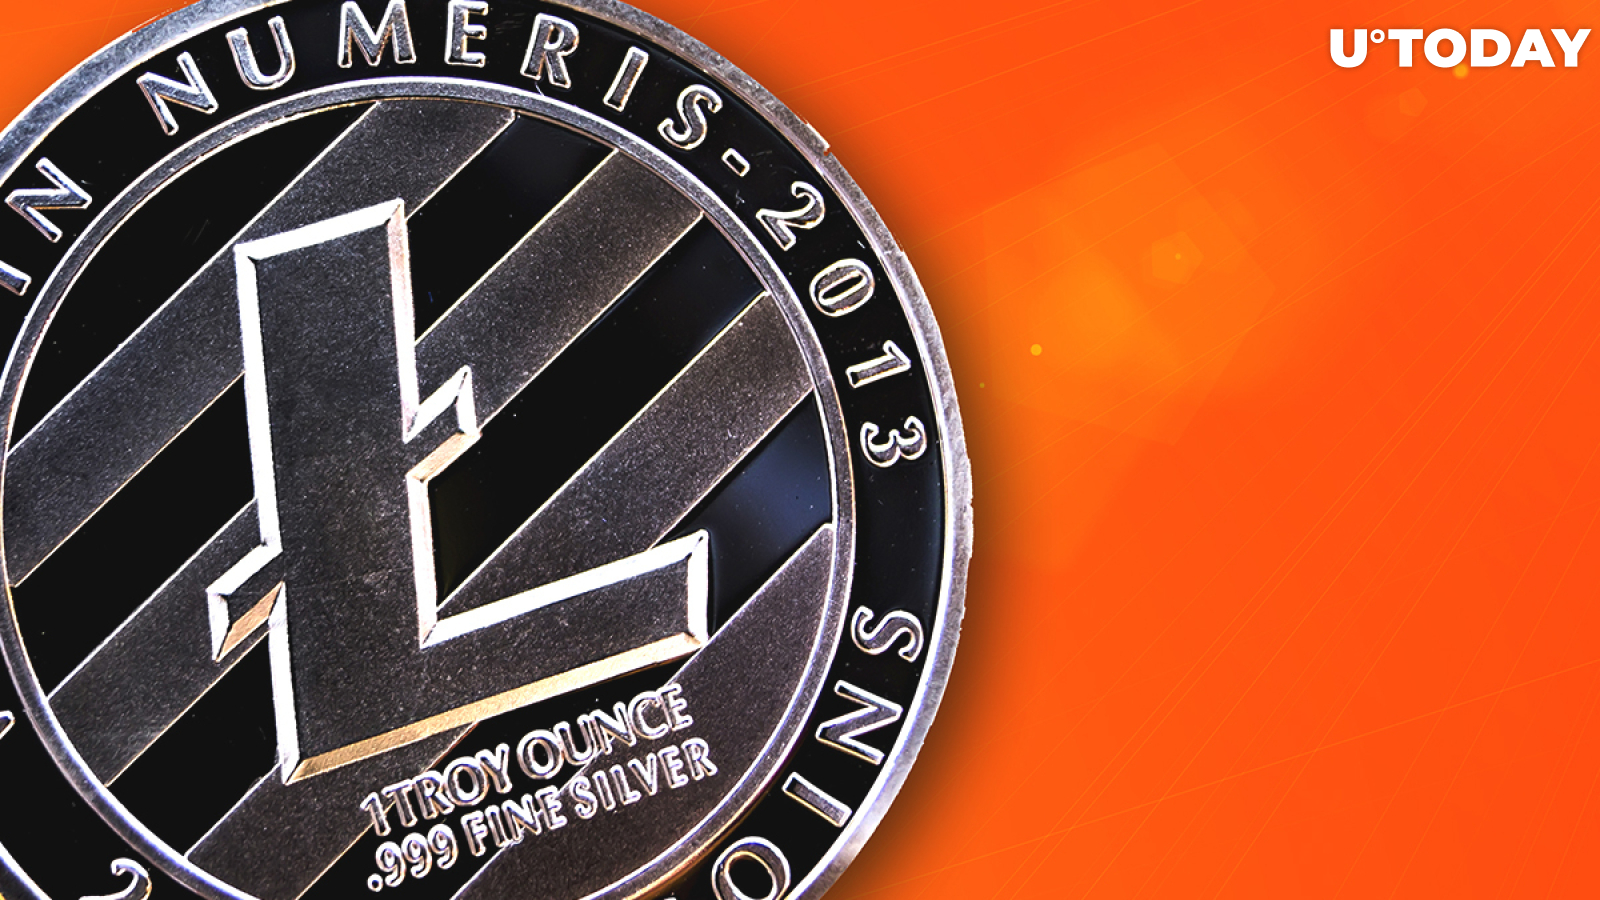 Litecoin (LTC) Price Skyrockets Almost 10%, 2019 Halving Expected to Give LTC Major Boost